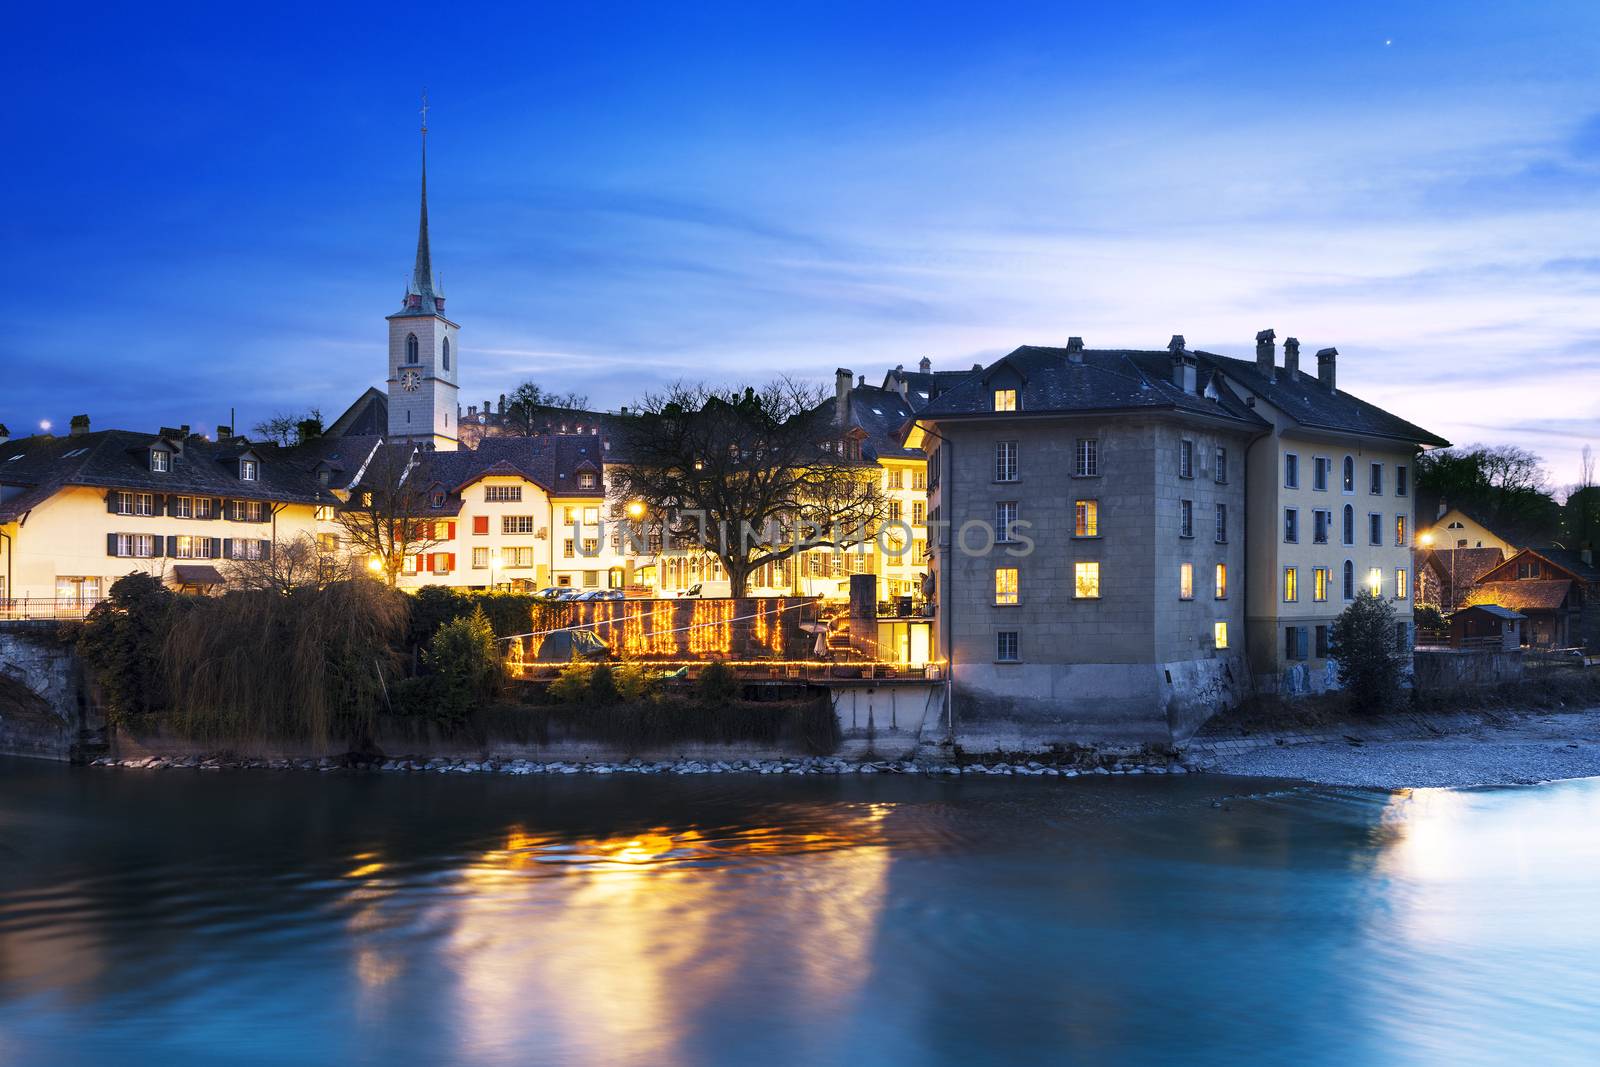 A view of the lower end of old town Bern, Switzerland in the evening.